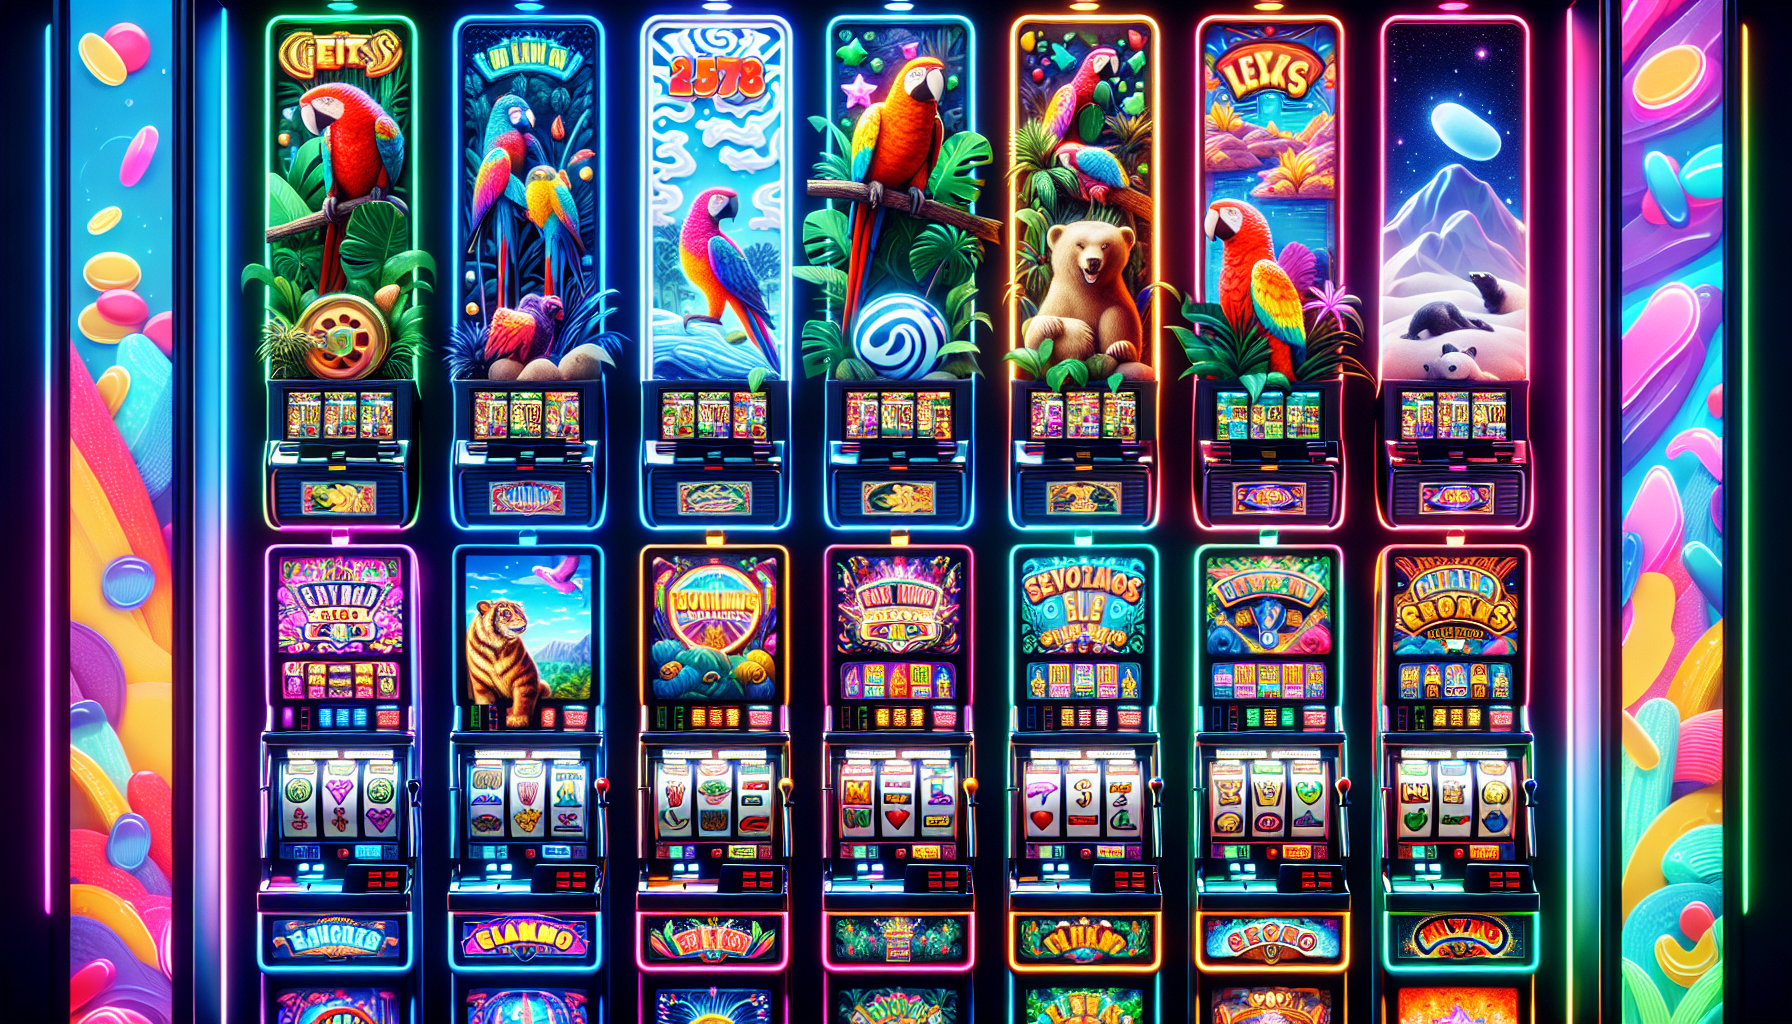 Exciting slot games at top online casinos